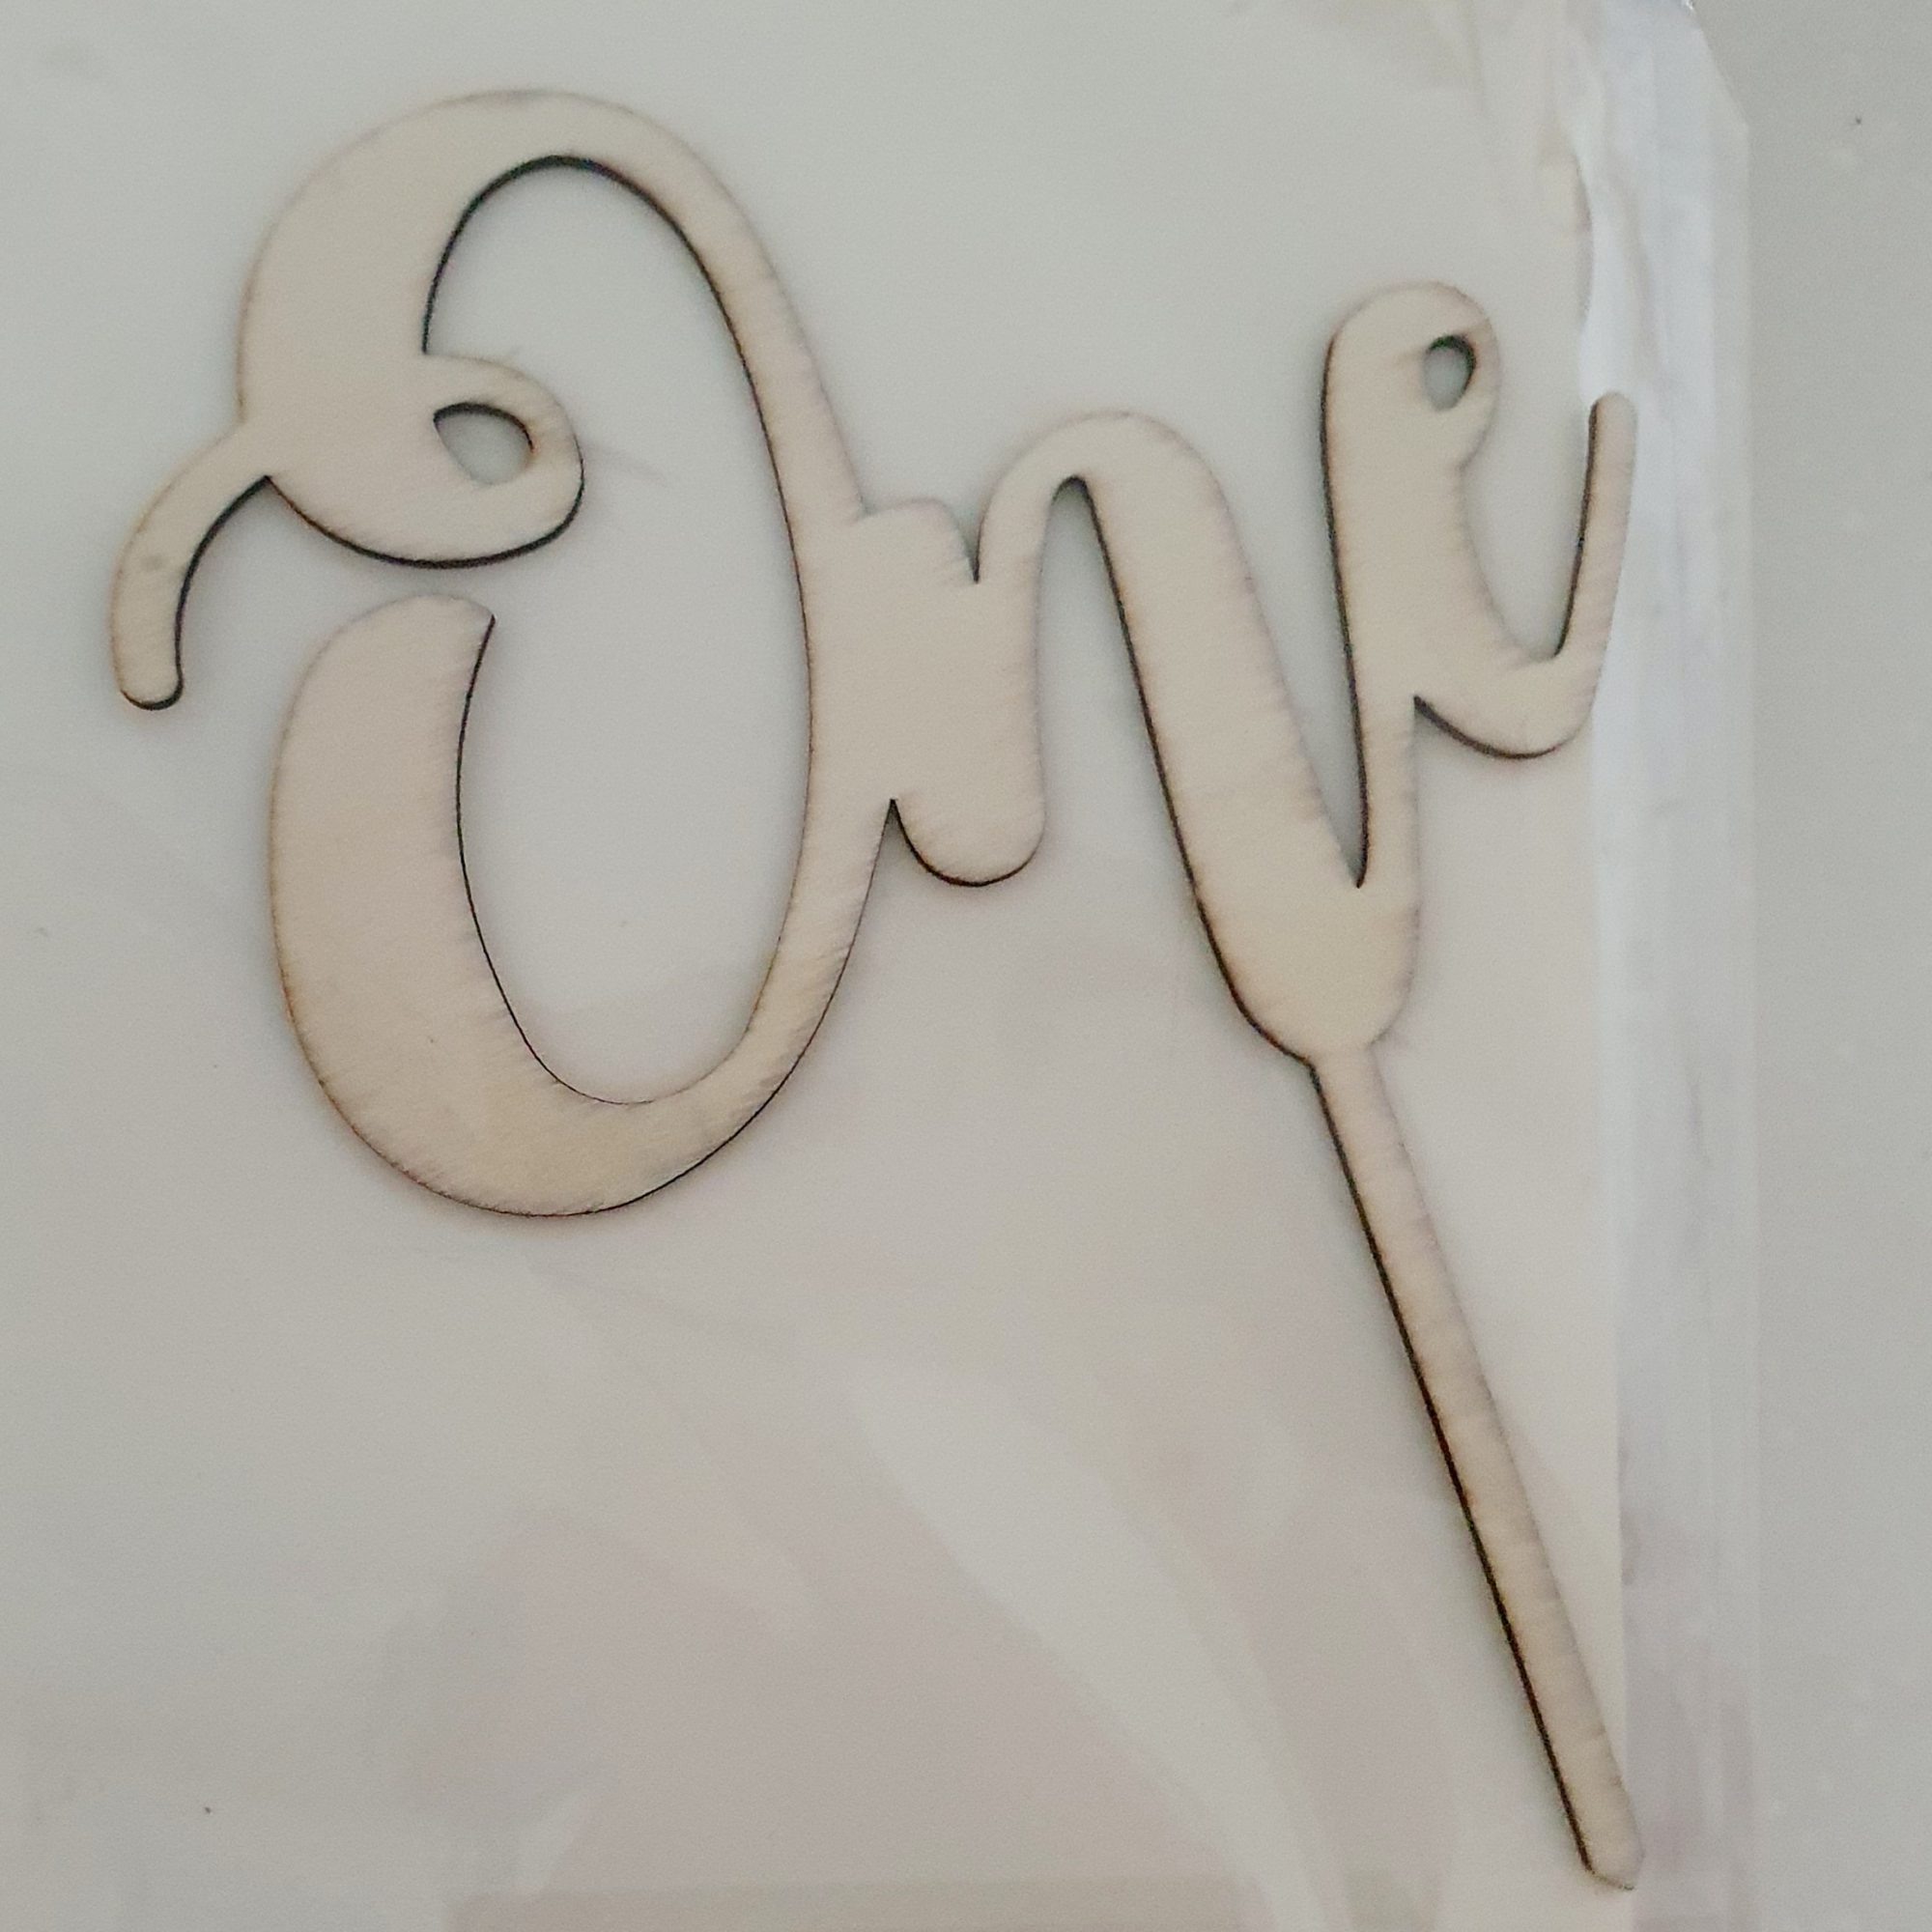 Wooden 'ONE' topper